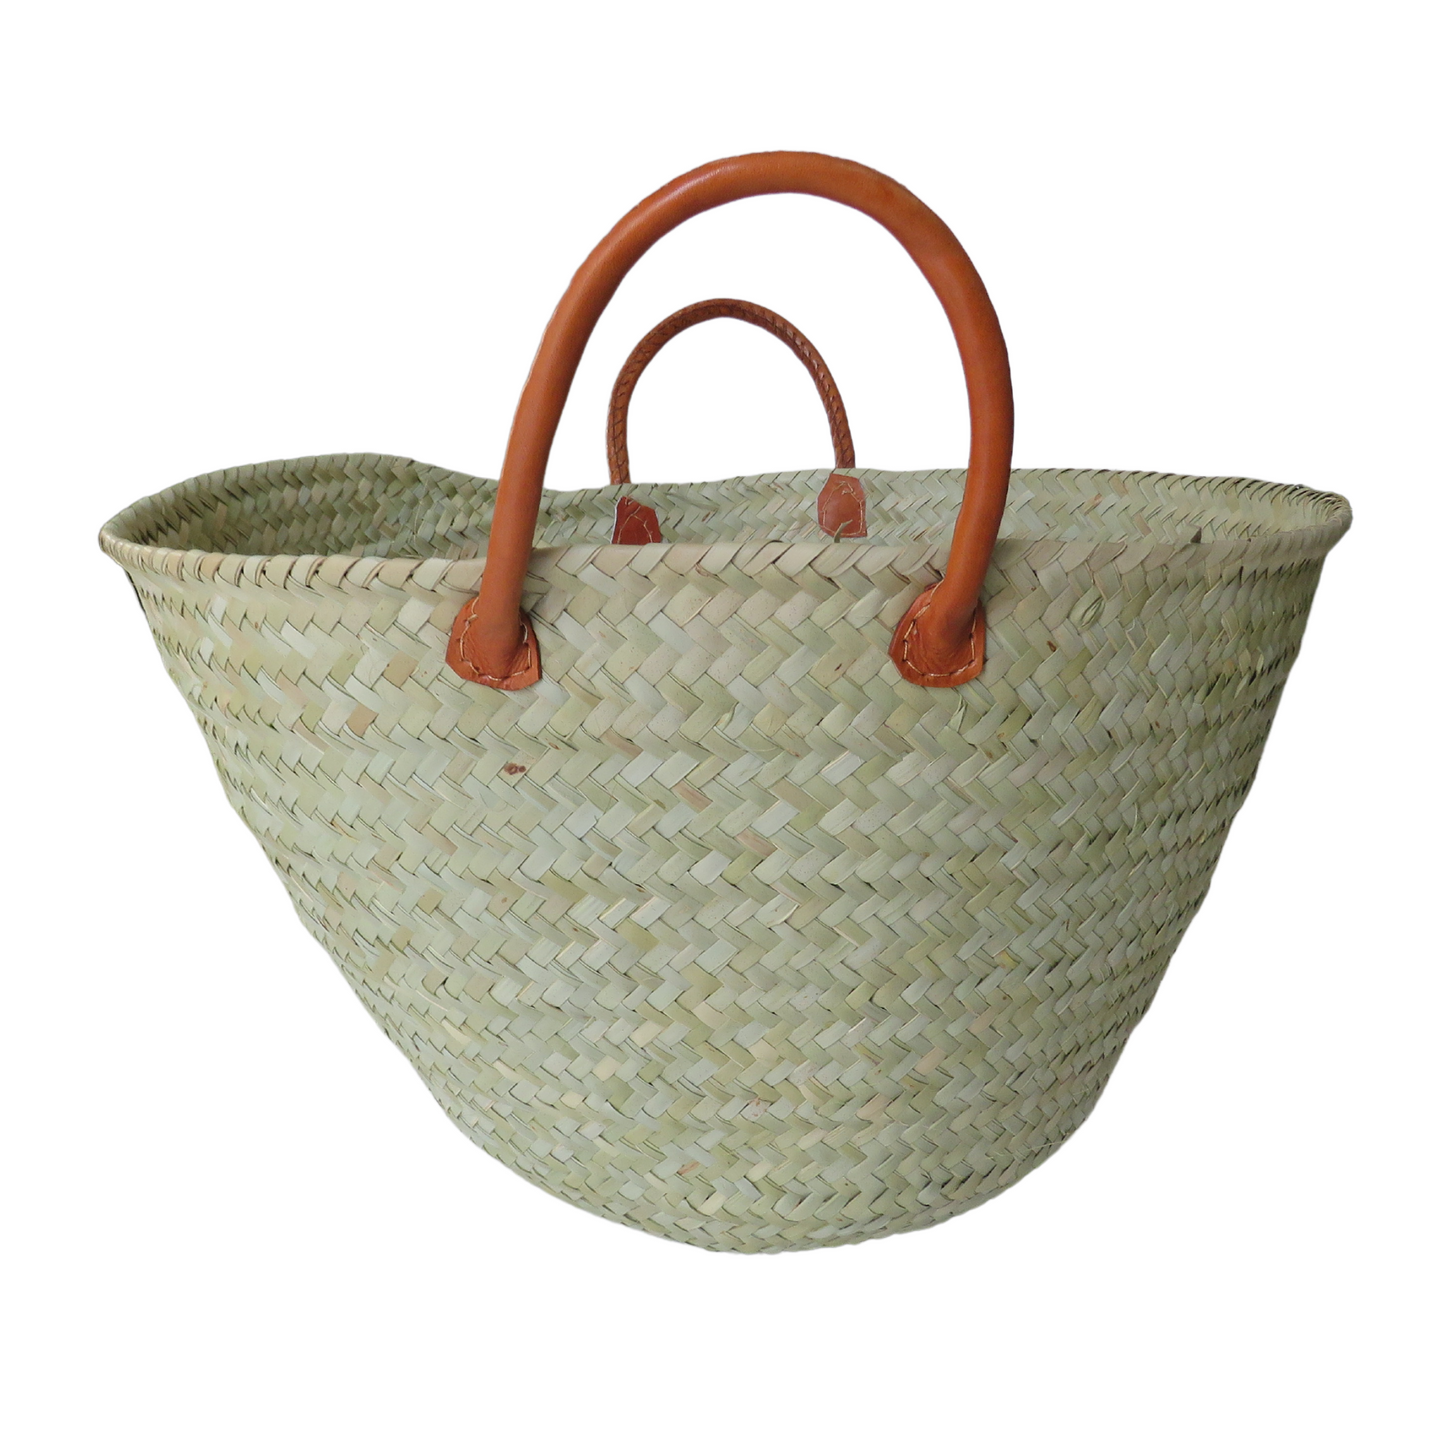 Everly Palm Leaf Natural Shopper with Short Leather Handles